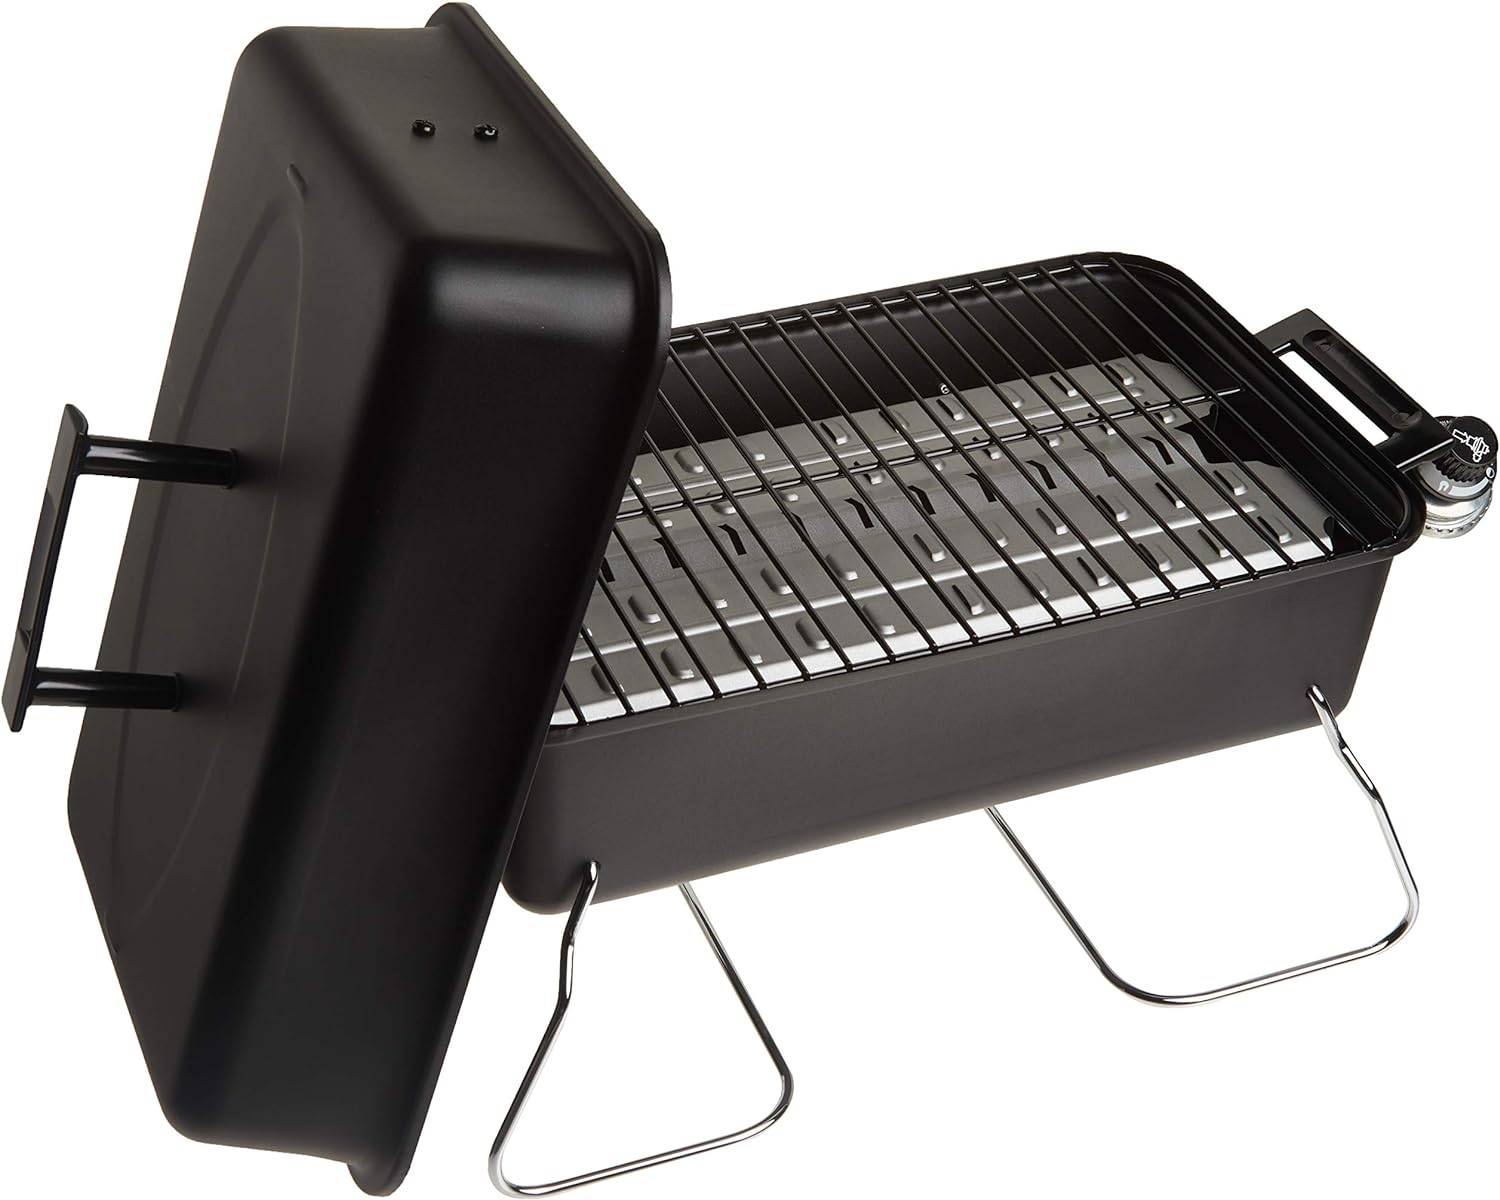 Char-Broil Portable Convective 1-Burner Stainless Steel Propane Gas Grill - 465133010